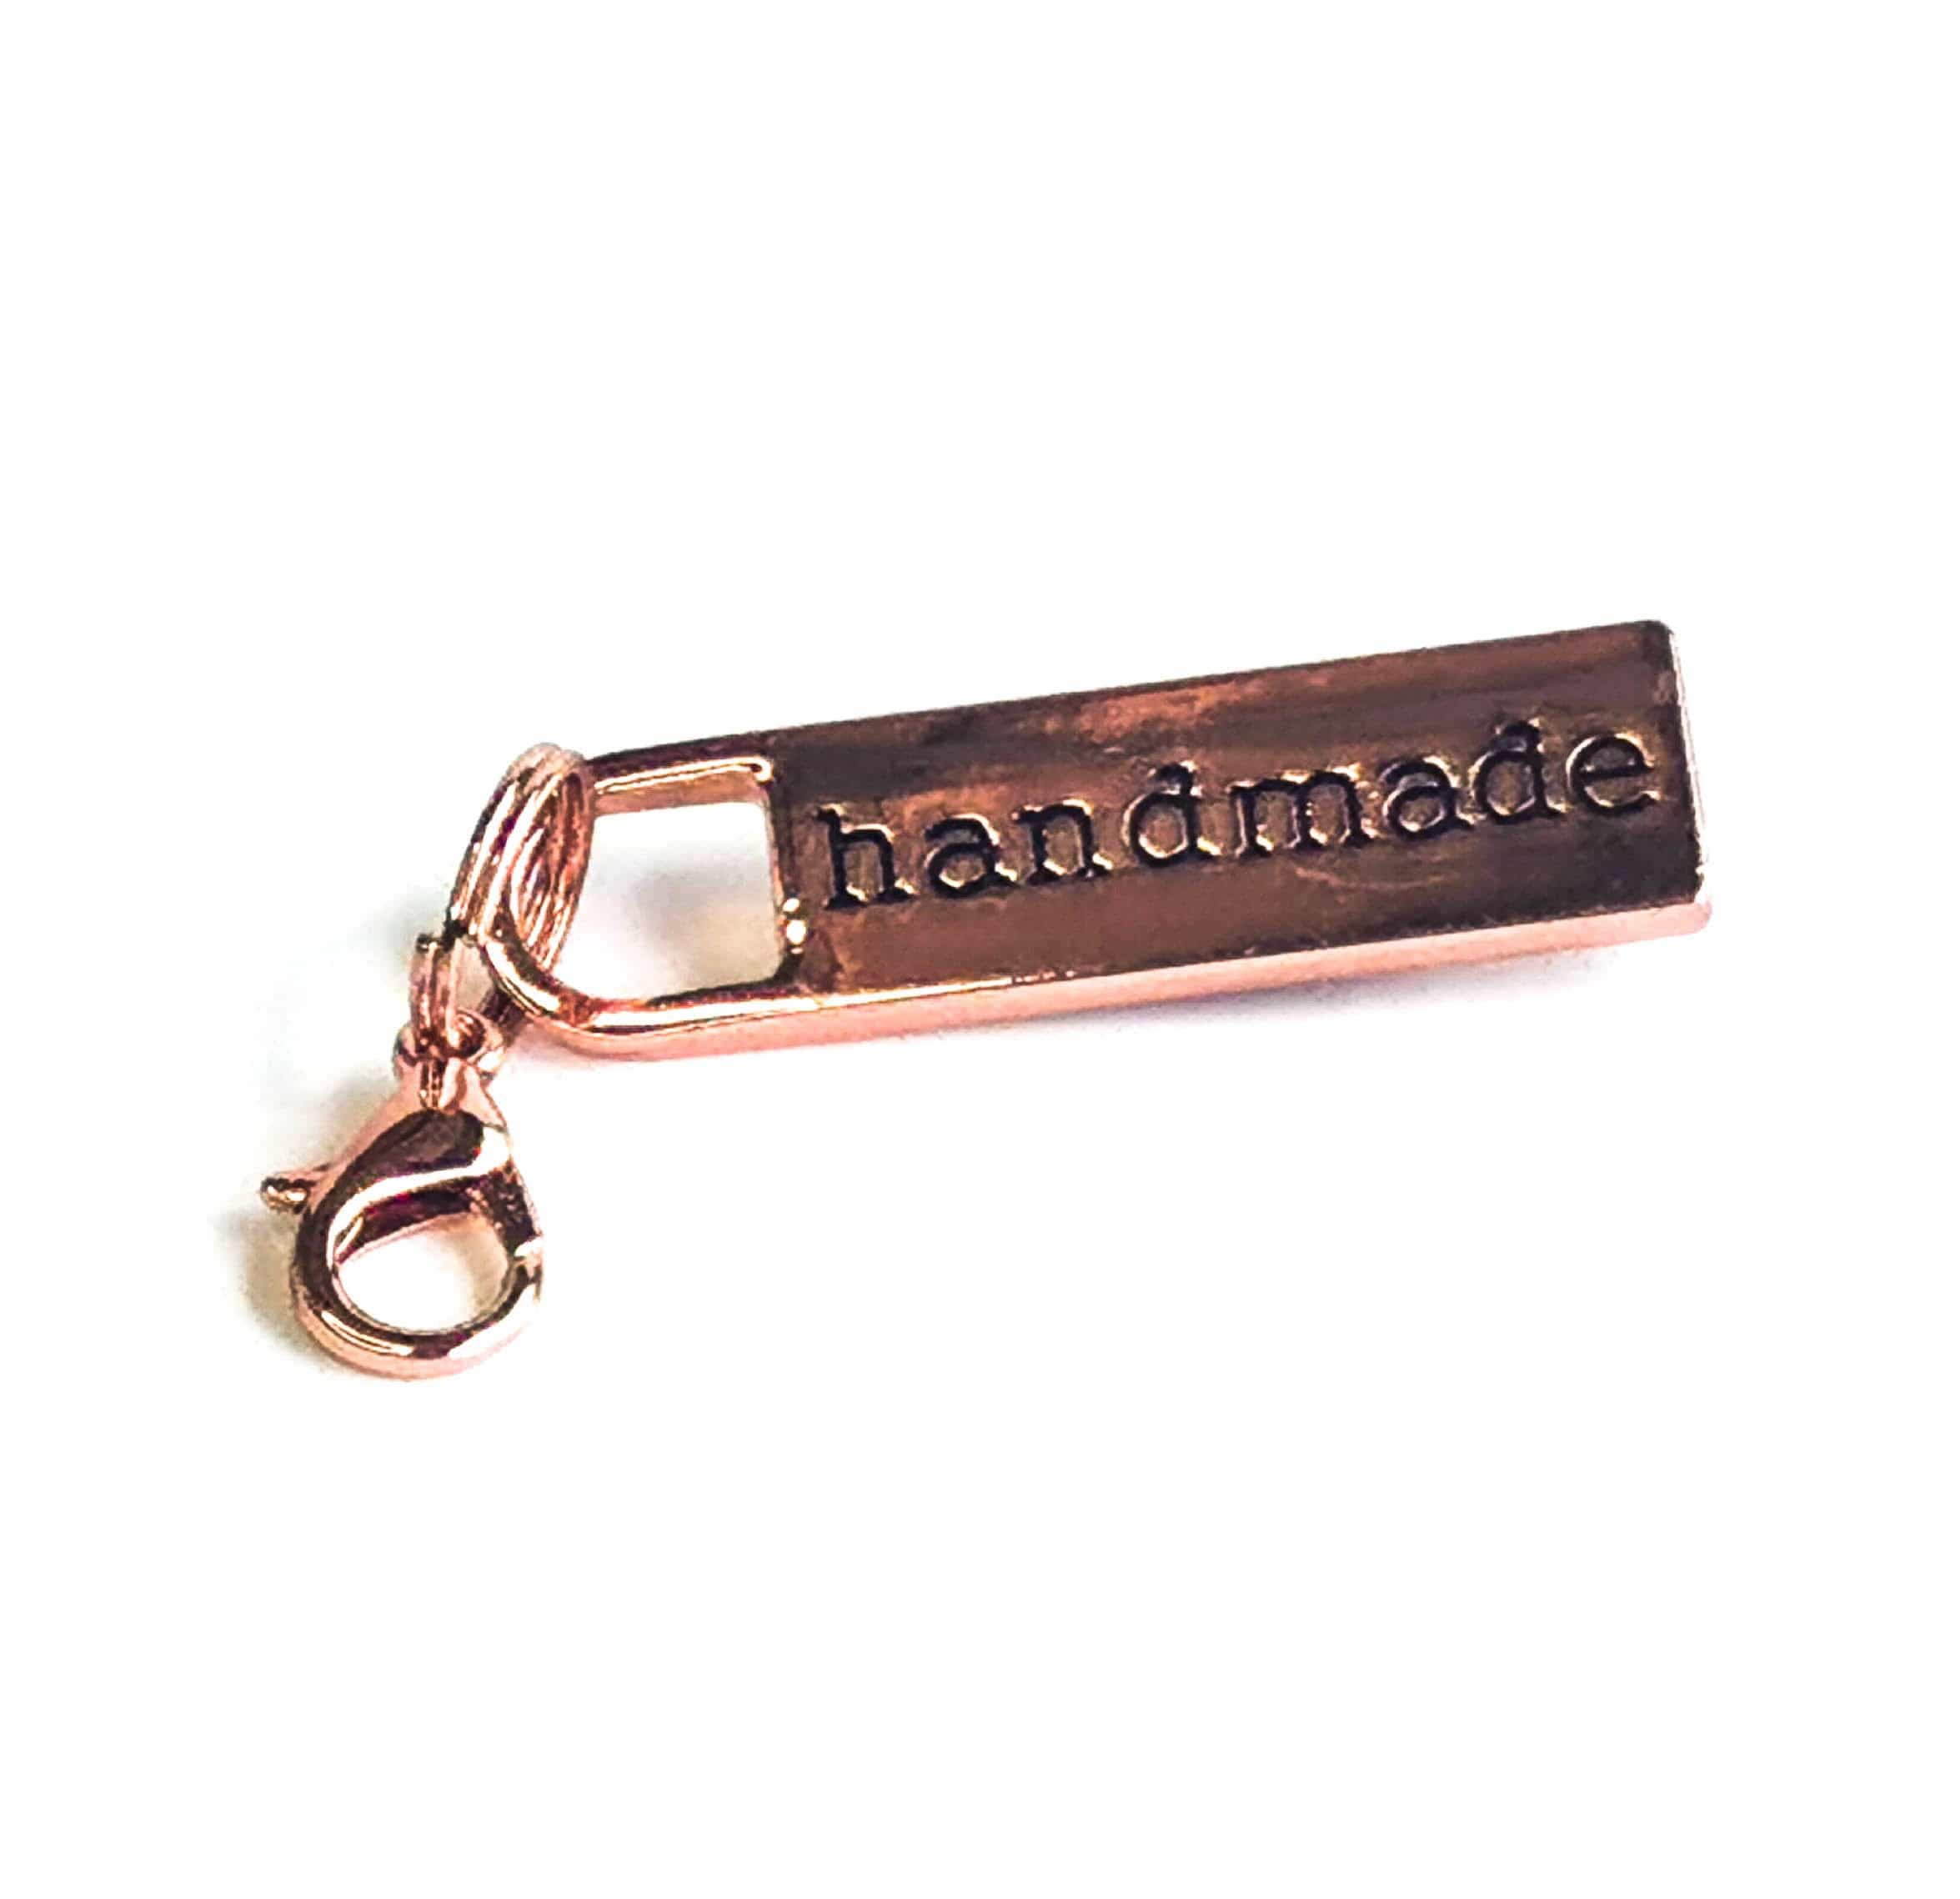 Kiwi Bagineers zipper pull Copper (Rose Gold) Metal Handmade zipper pull for bags with hook and ring attachment (1 piece).